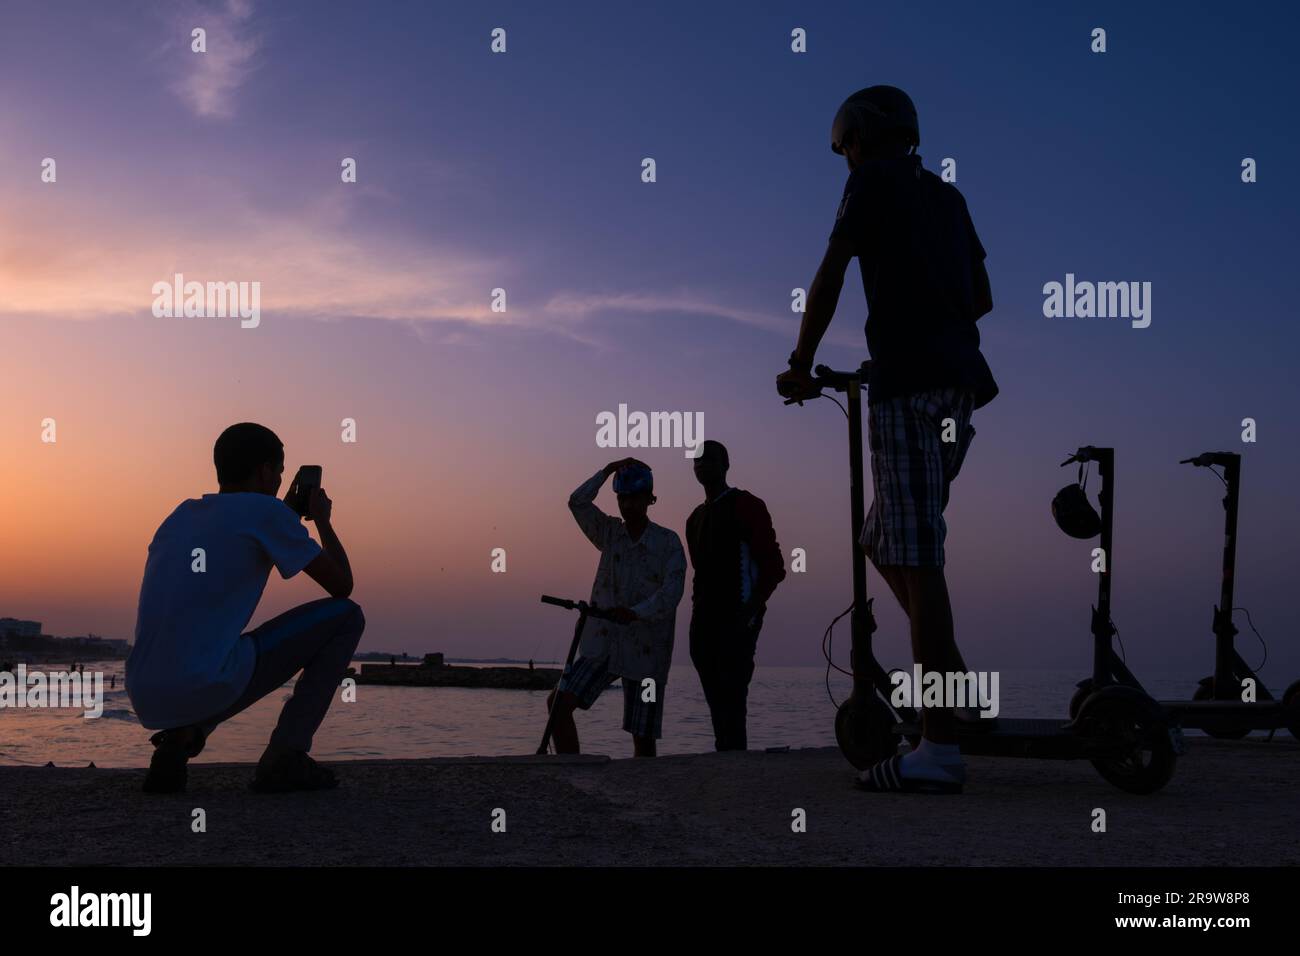 A group of young men on the beach in Sousse at sunset, Tunisia Stock Photo